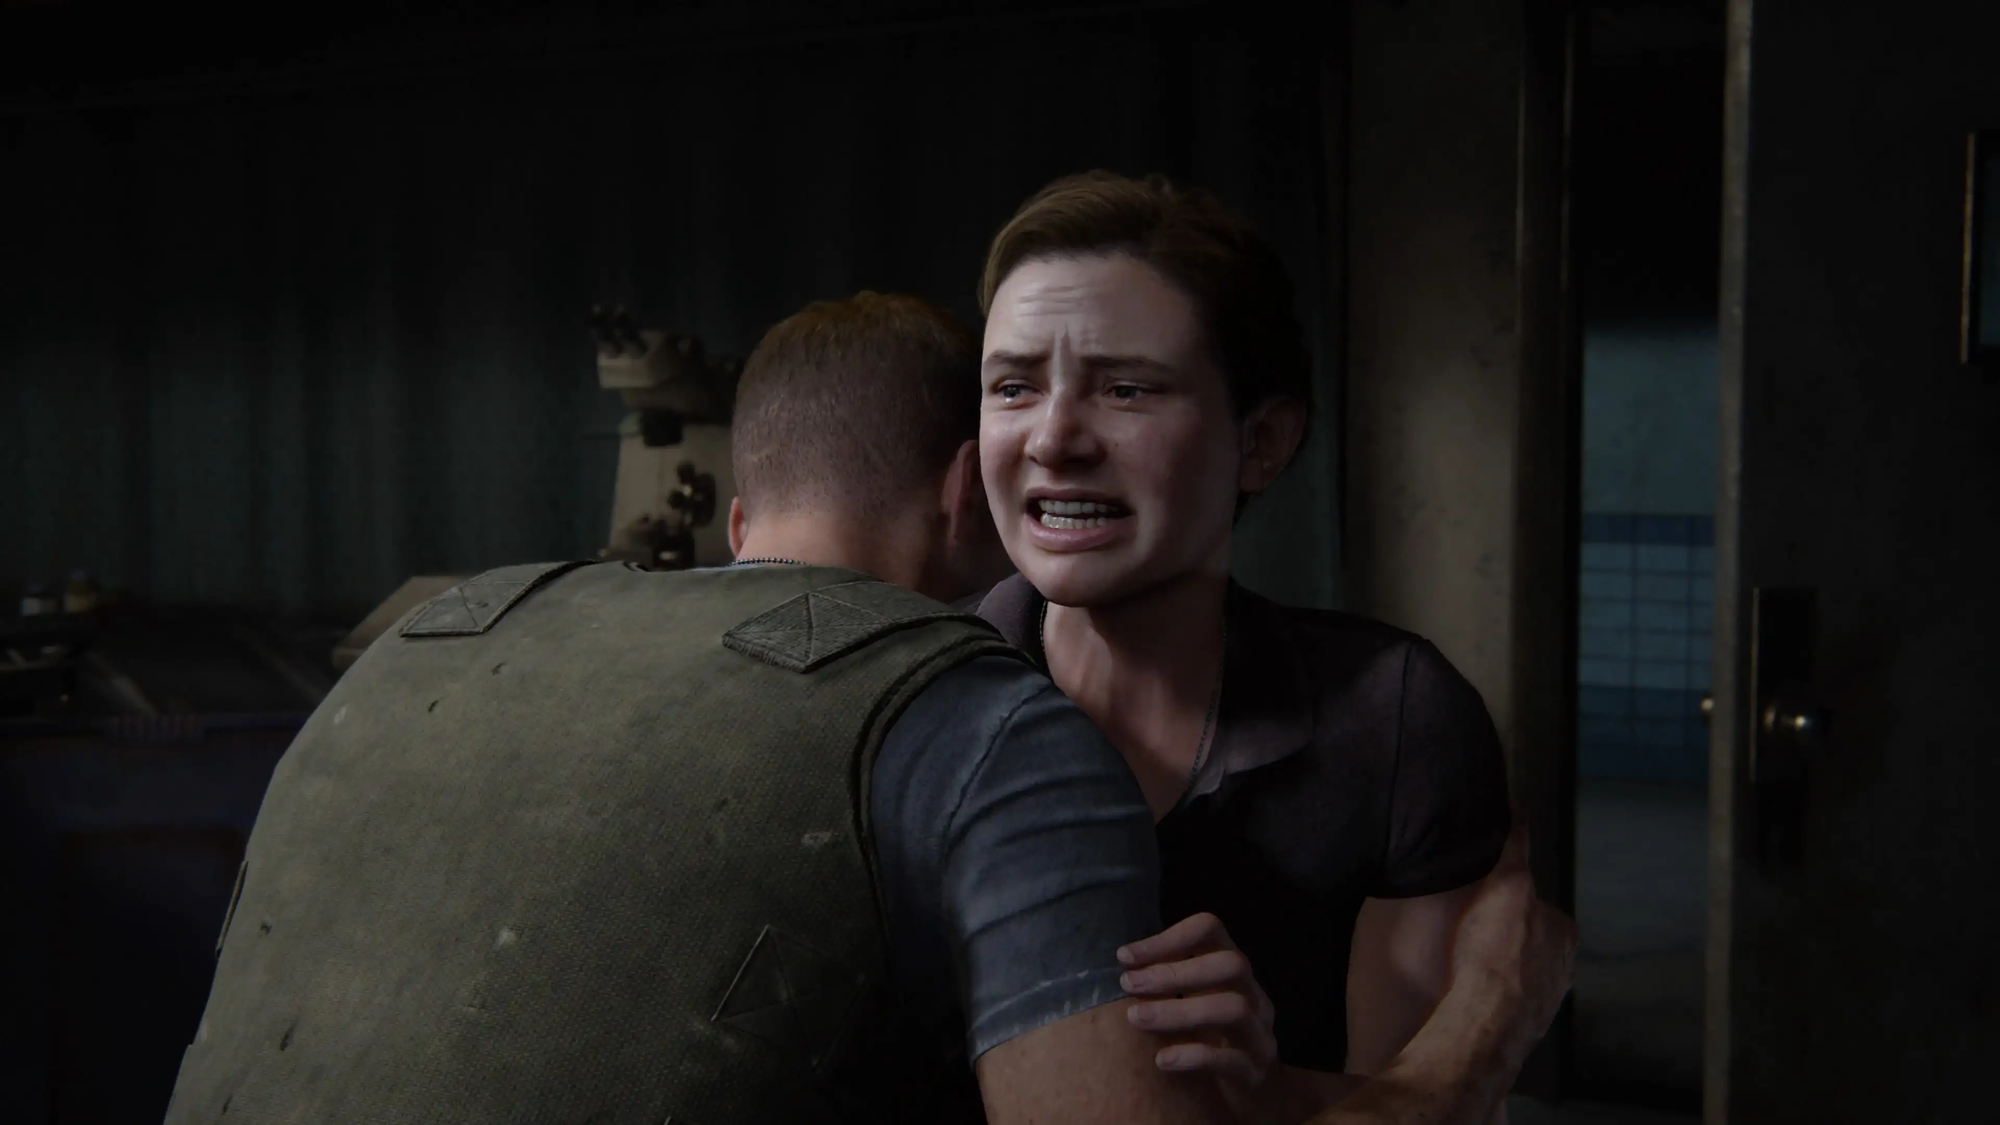 THEDISCFATHER on X: The Last of us Part 2 Remastered is coming To